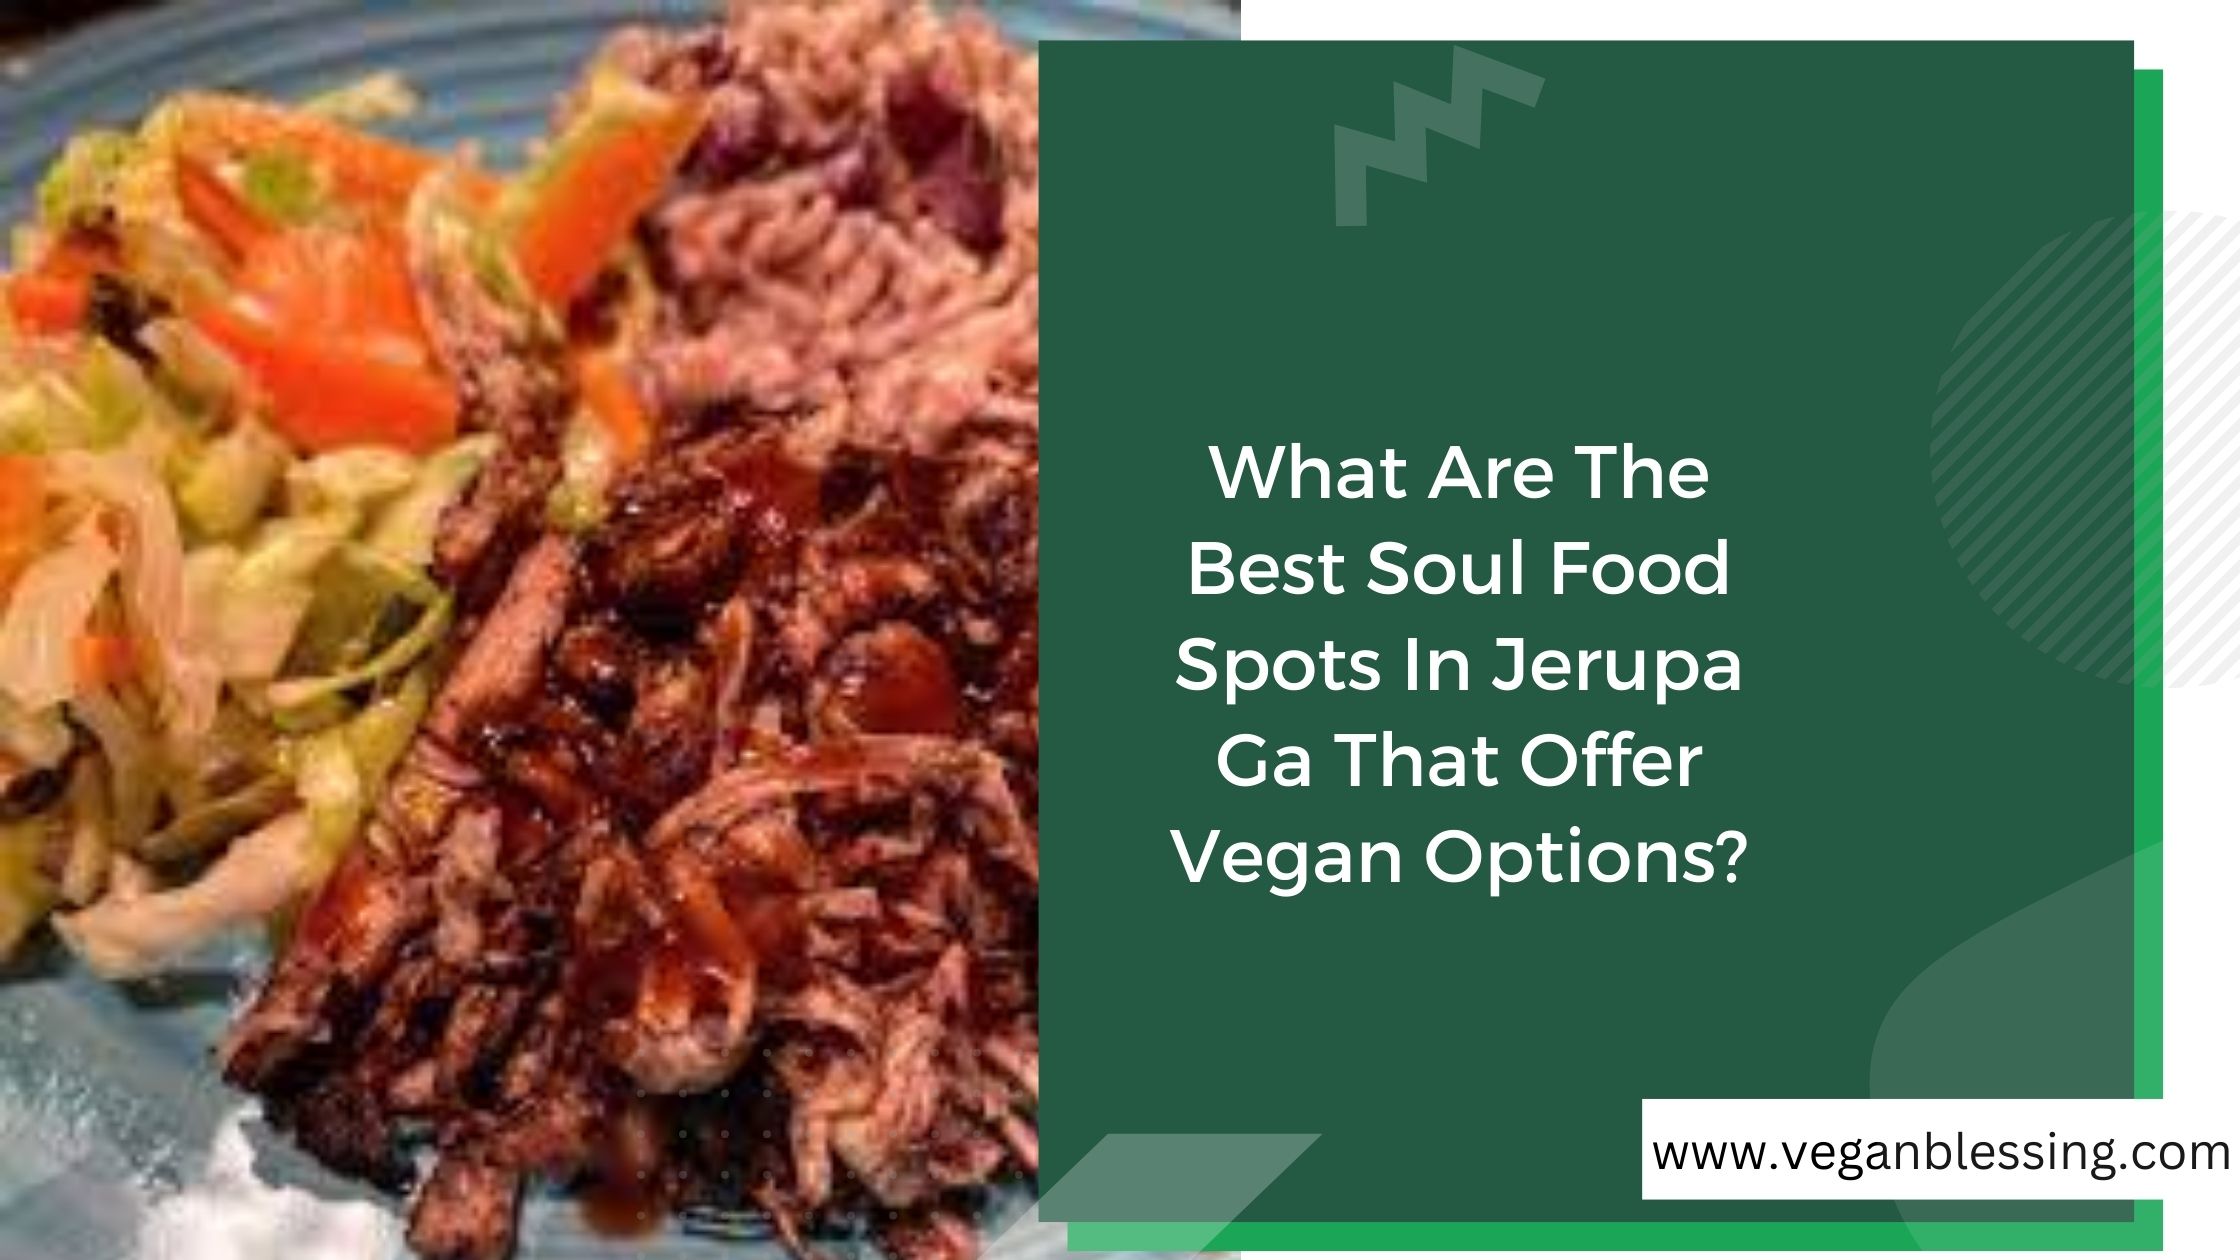 What Are The Best Soul Food Spots In Jerupa Ga That Offer Vegan Options? What Are The Best Soul Food Spots In Jerupa Ga That Offer Vegan Options